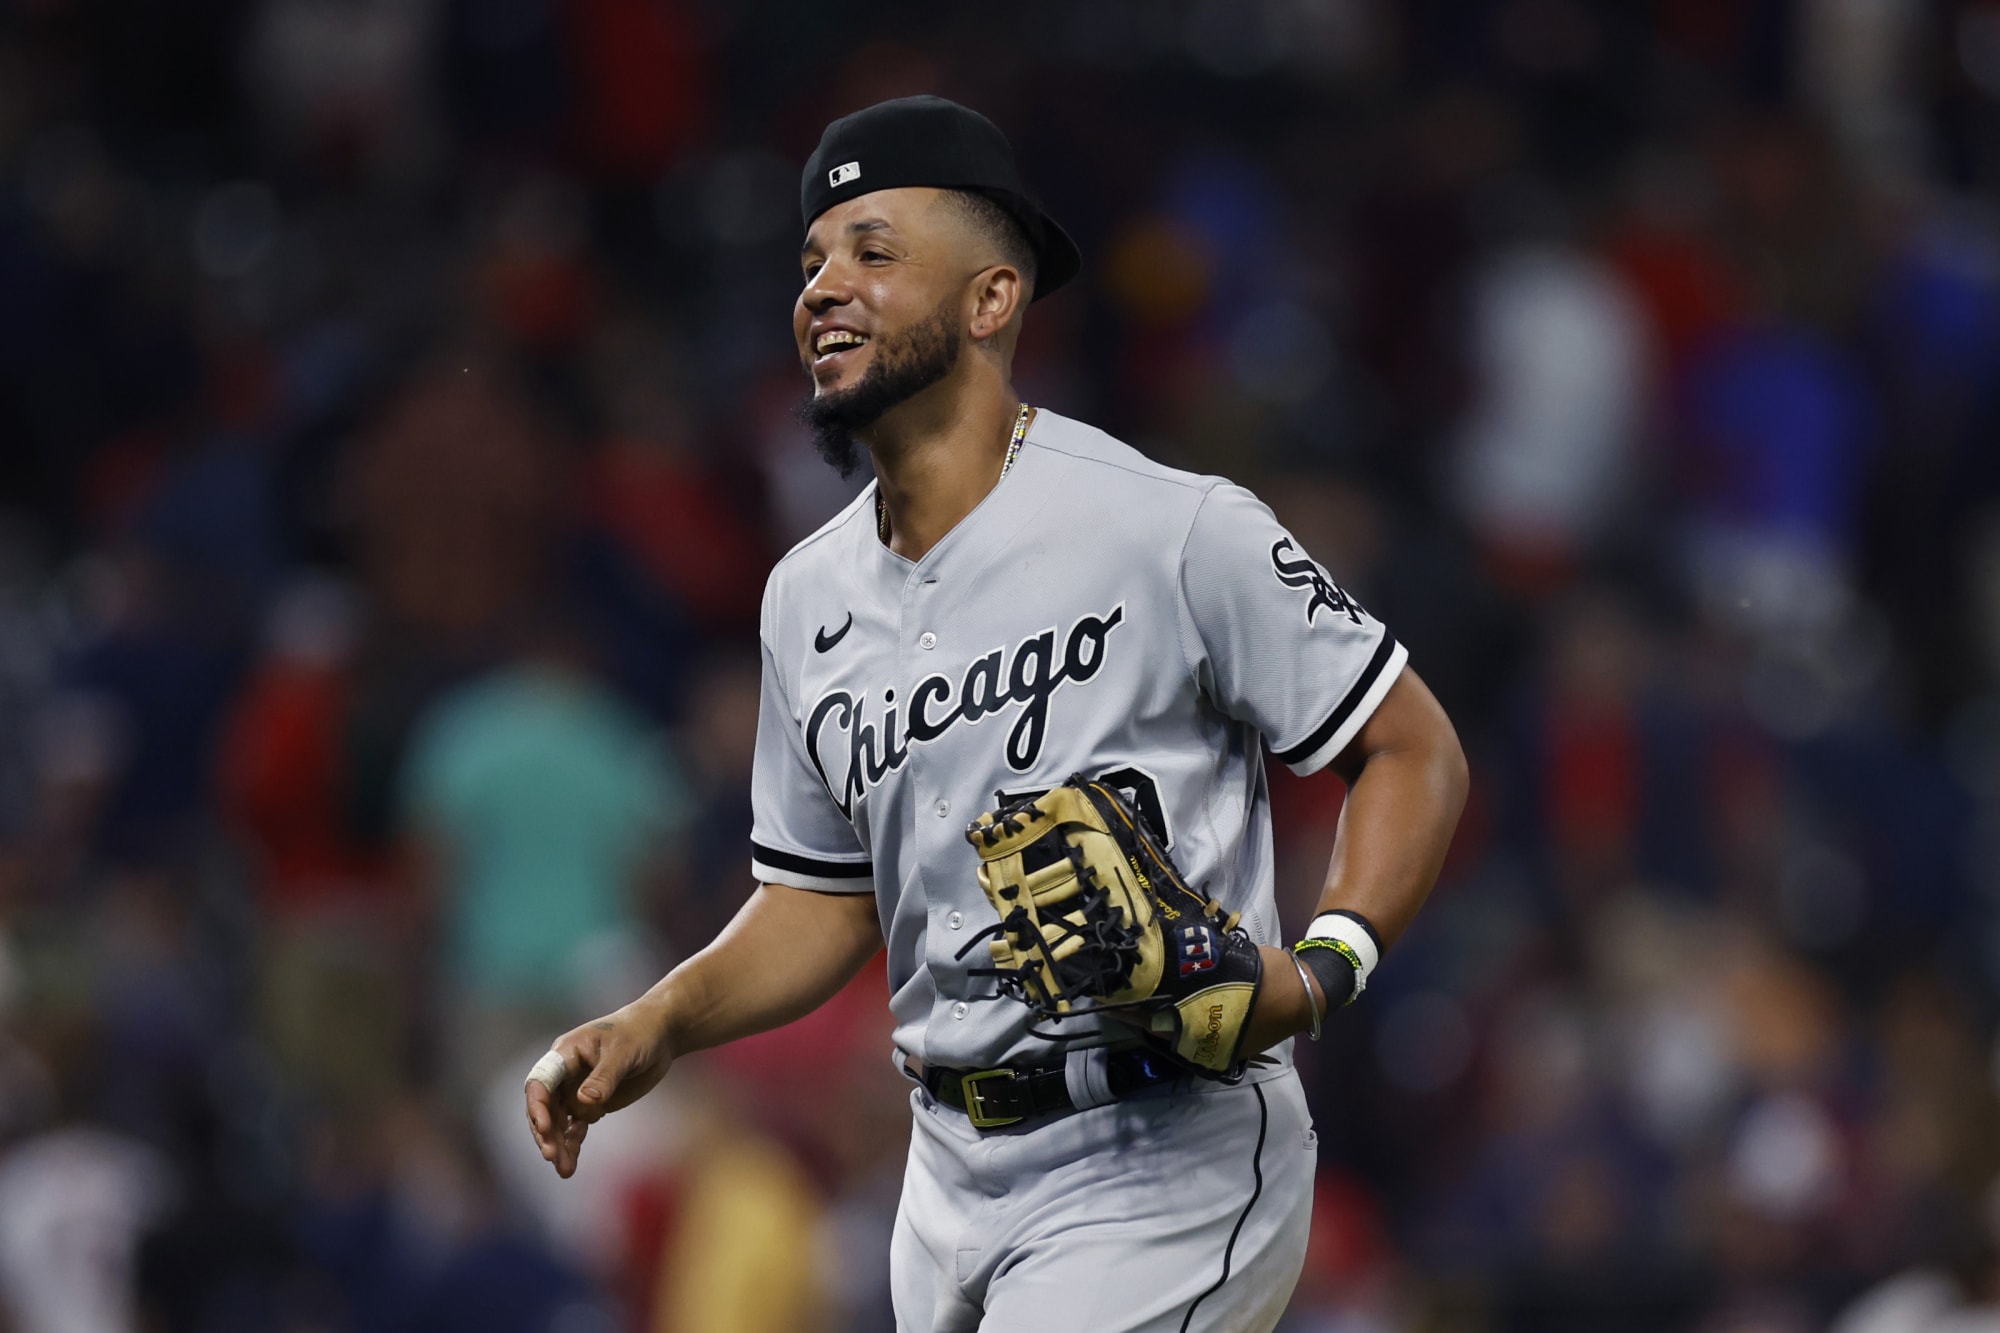 Reunited, White Sox and José Abreu find each other in the worst of